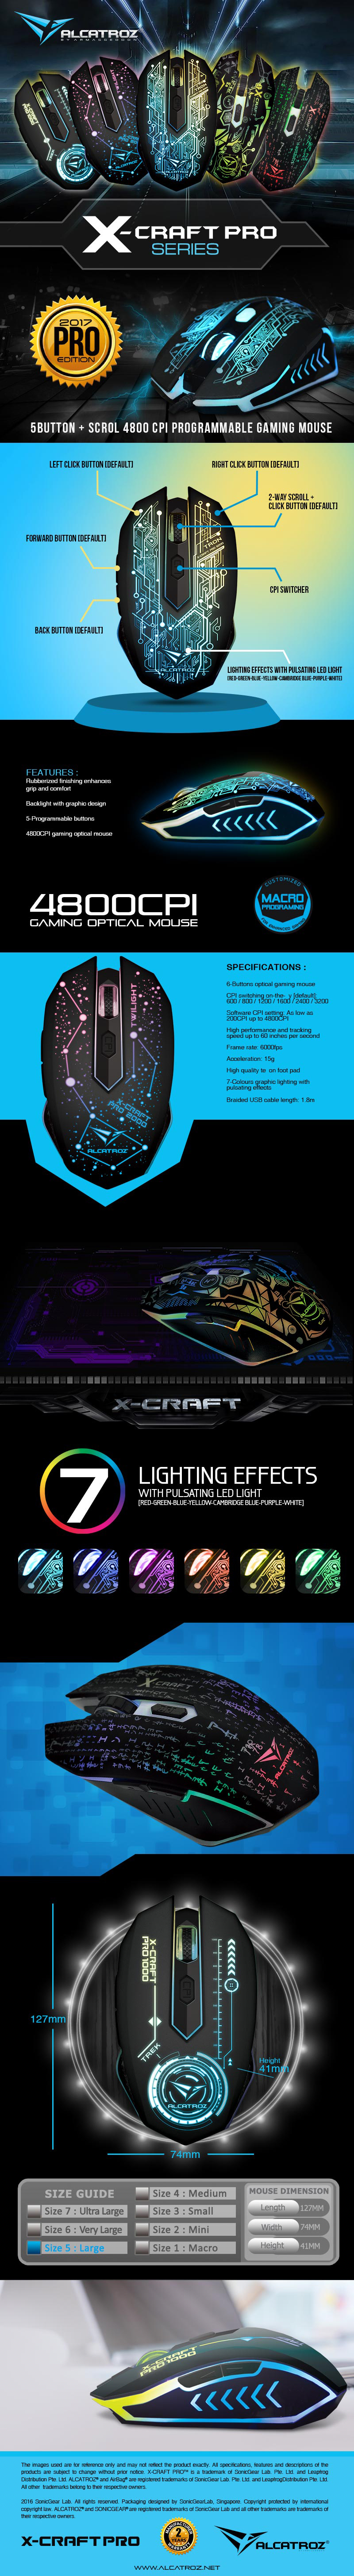 Mouse-Mouse-Pads-ALCATROZ-X-Craft-PRO-Twilight-2000-7-Colour-Gaming-Optical-Mouse-2